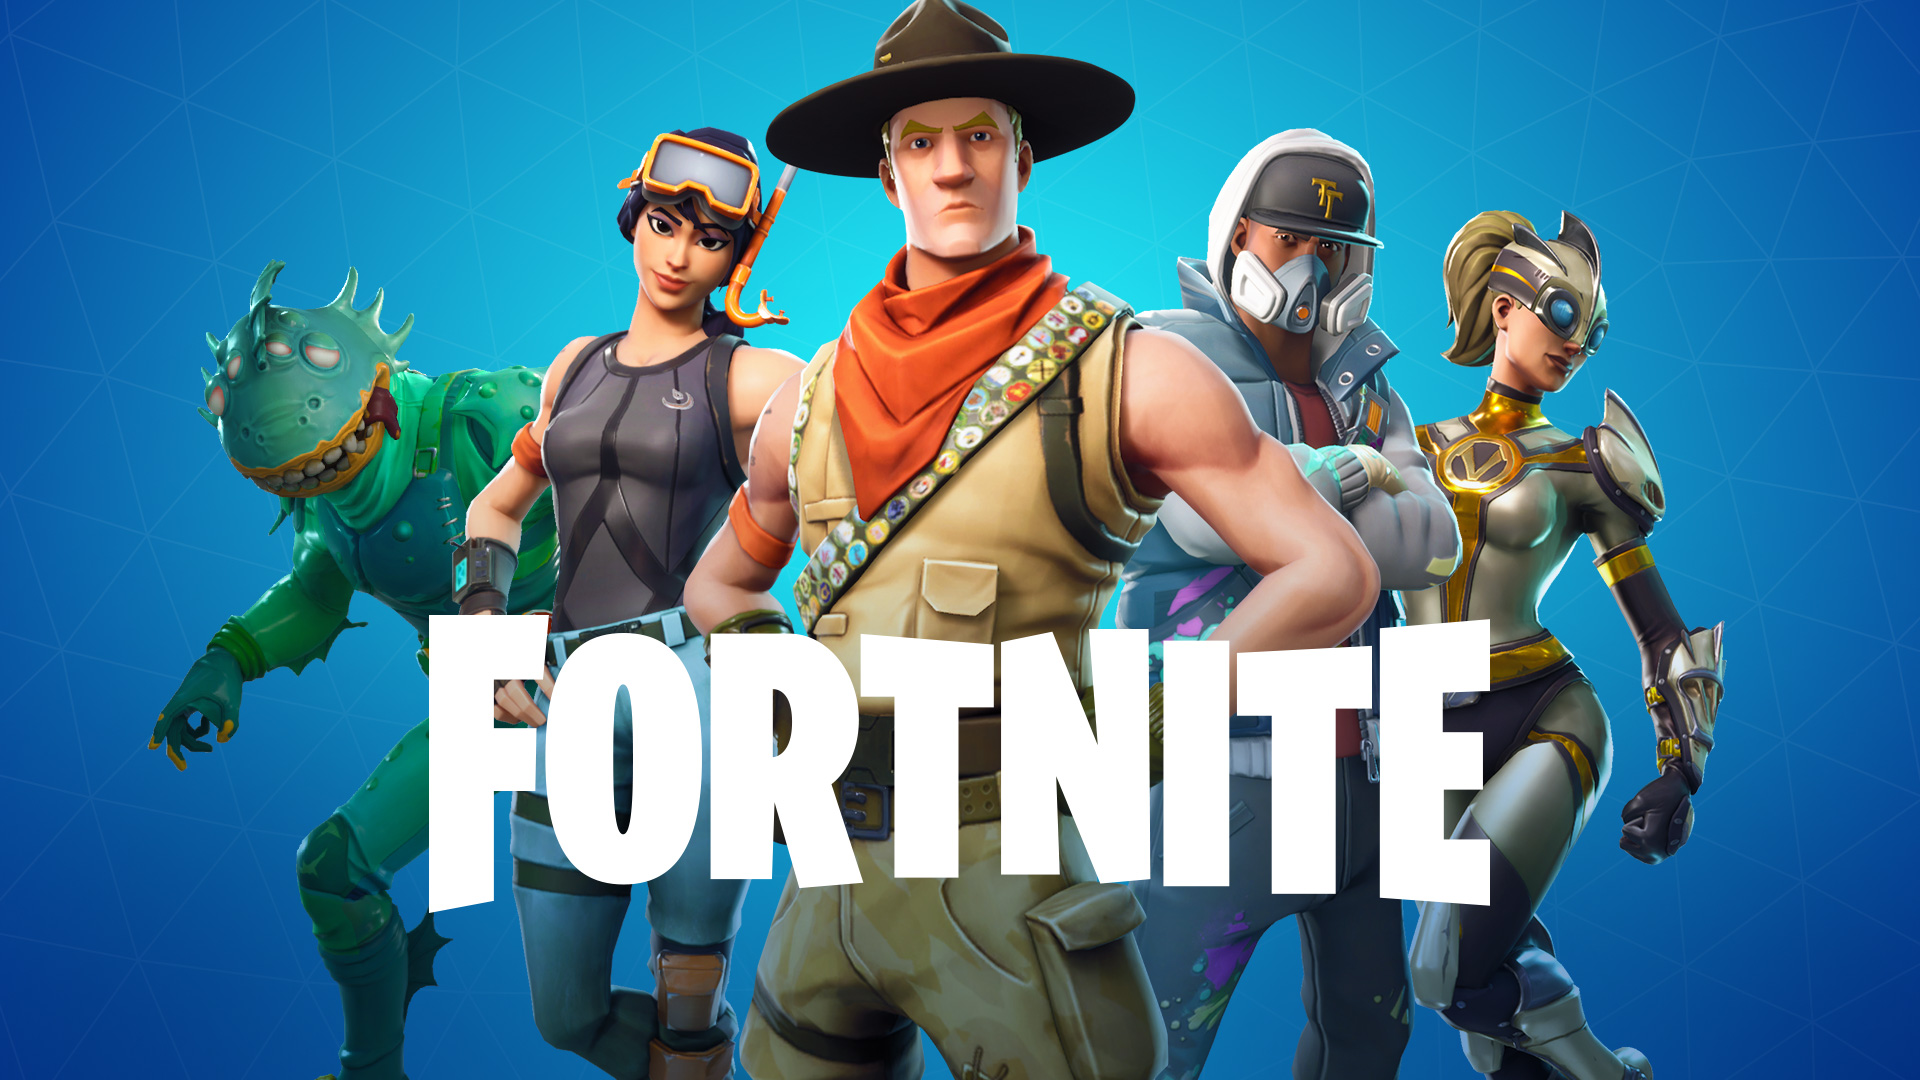 Fortnite reaches 8.3 million concurrent players